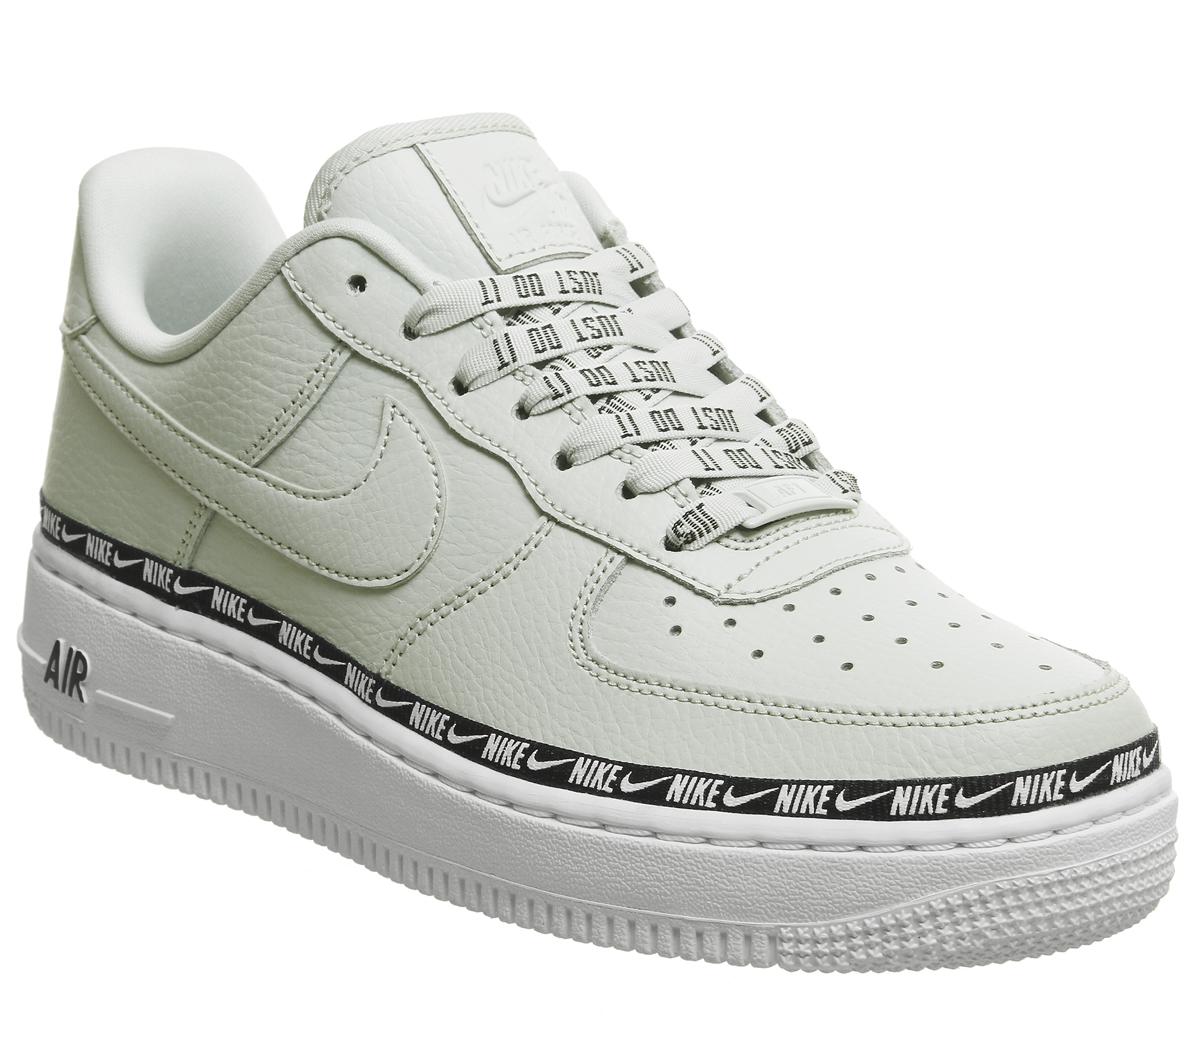 NikeAir Force 1 07 TrainersLight Silver Black White F